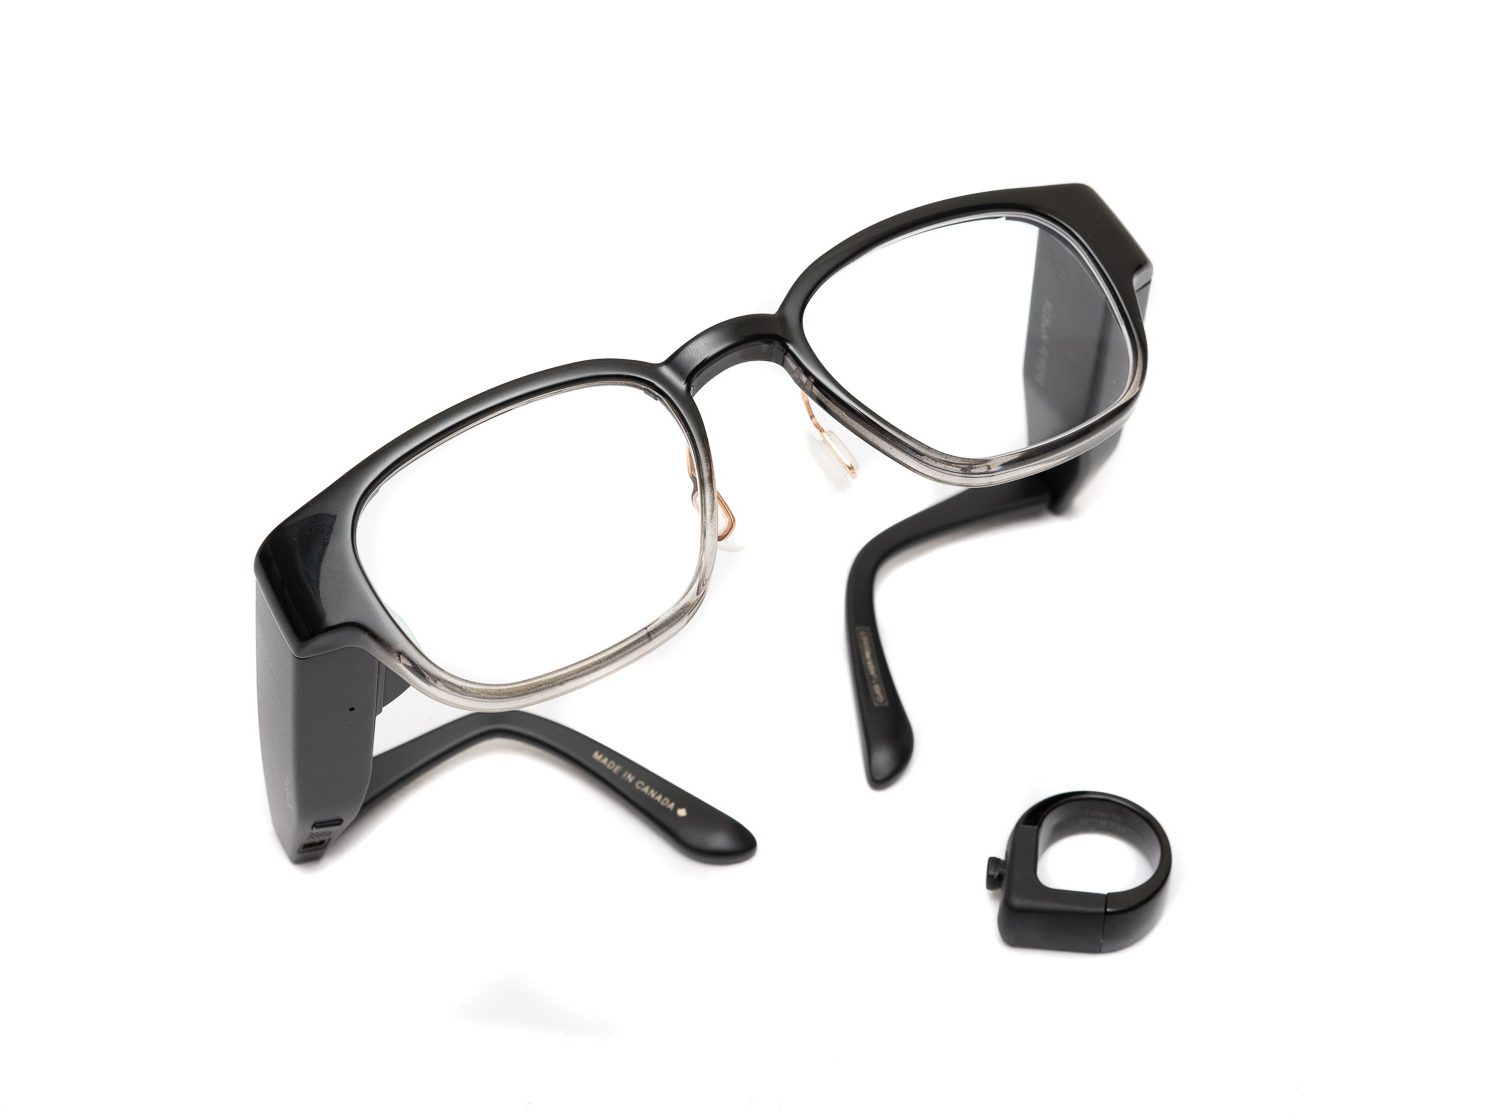 North Focals Review An Impressive And Stylish Try At Smart